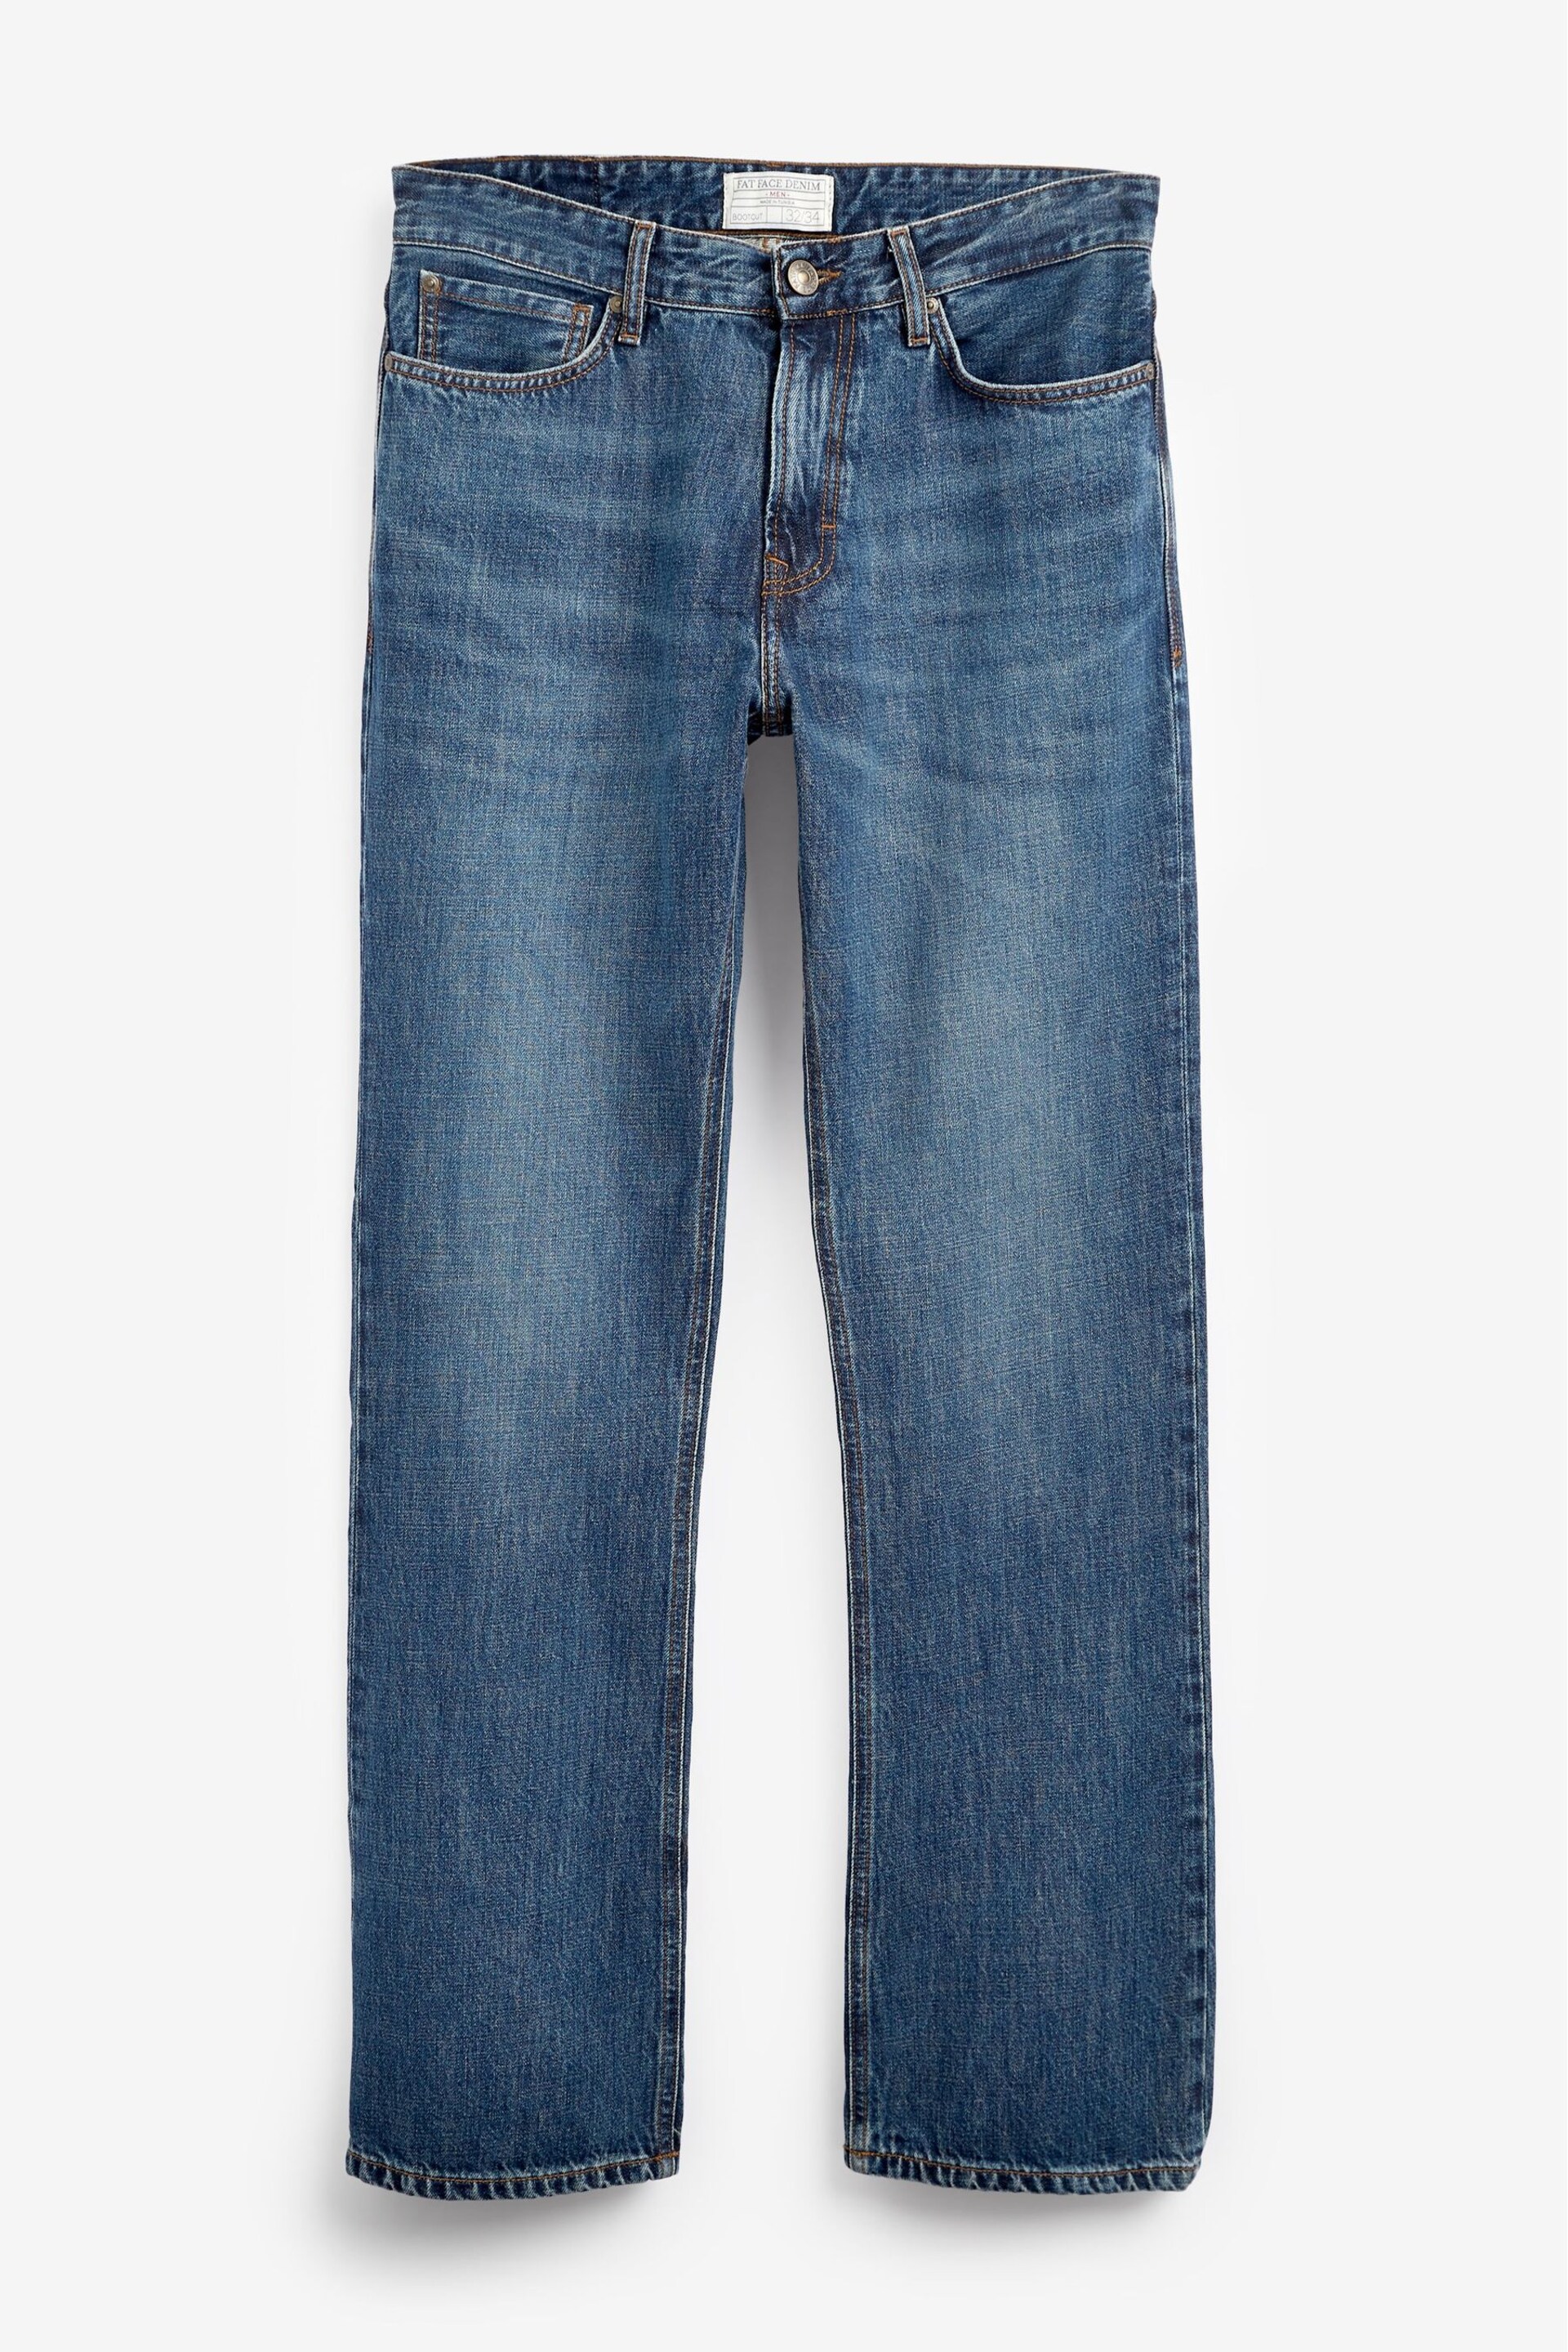 FatFace Mid Wash Denim Bootcut Jeans - Image 5 of 5